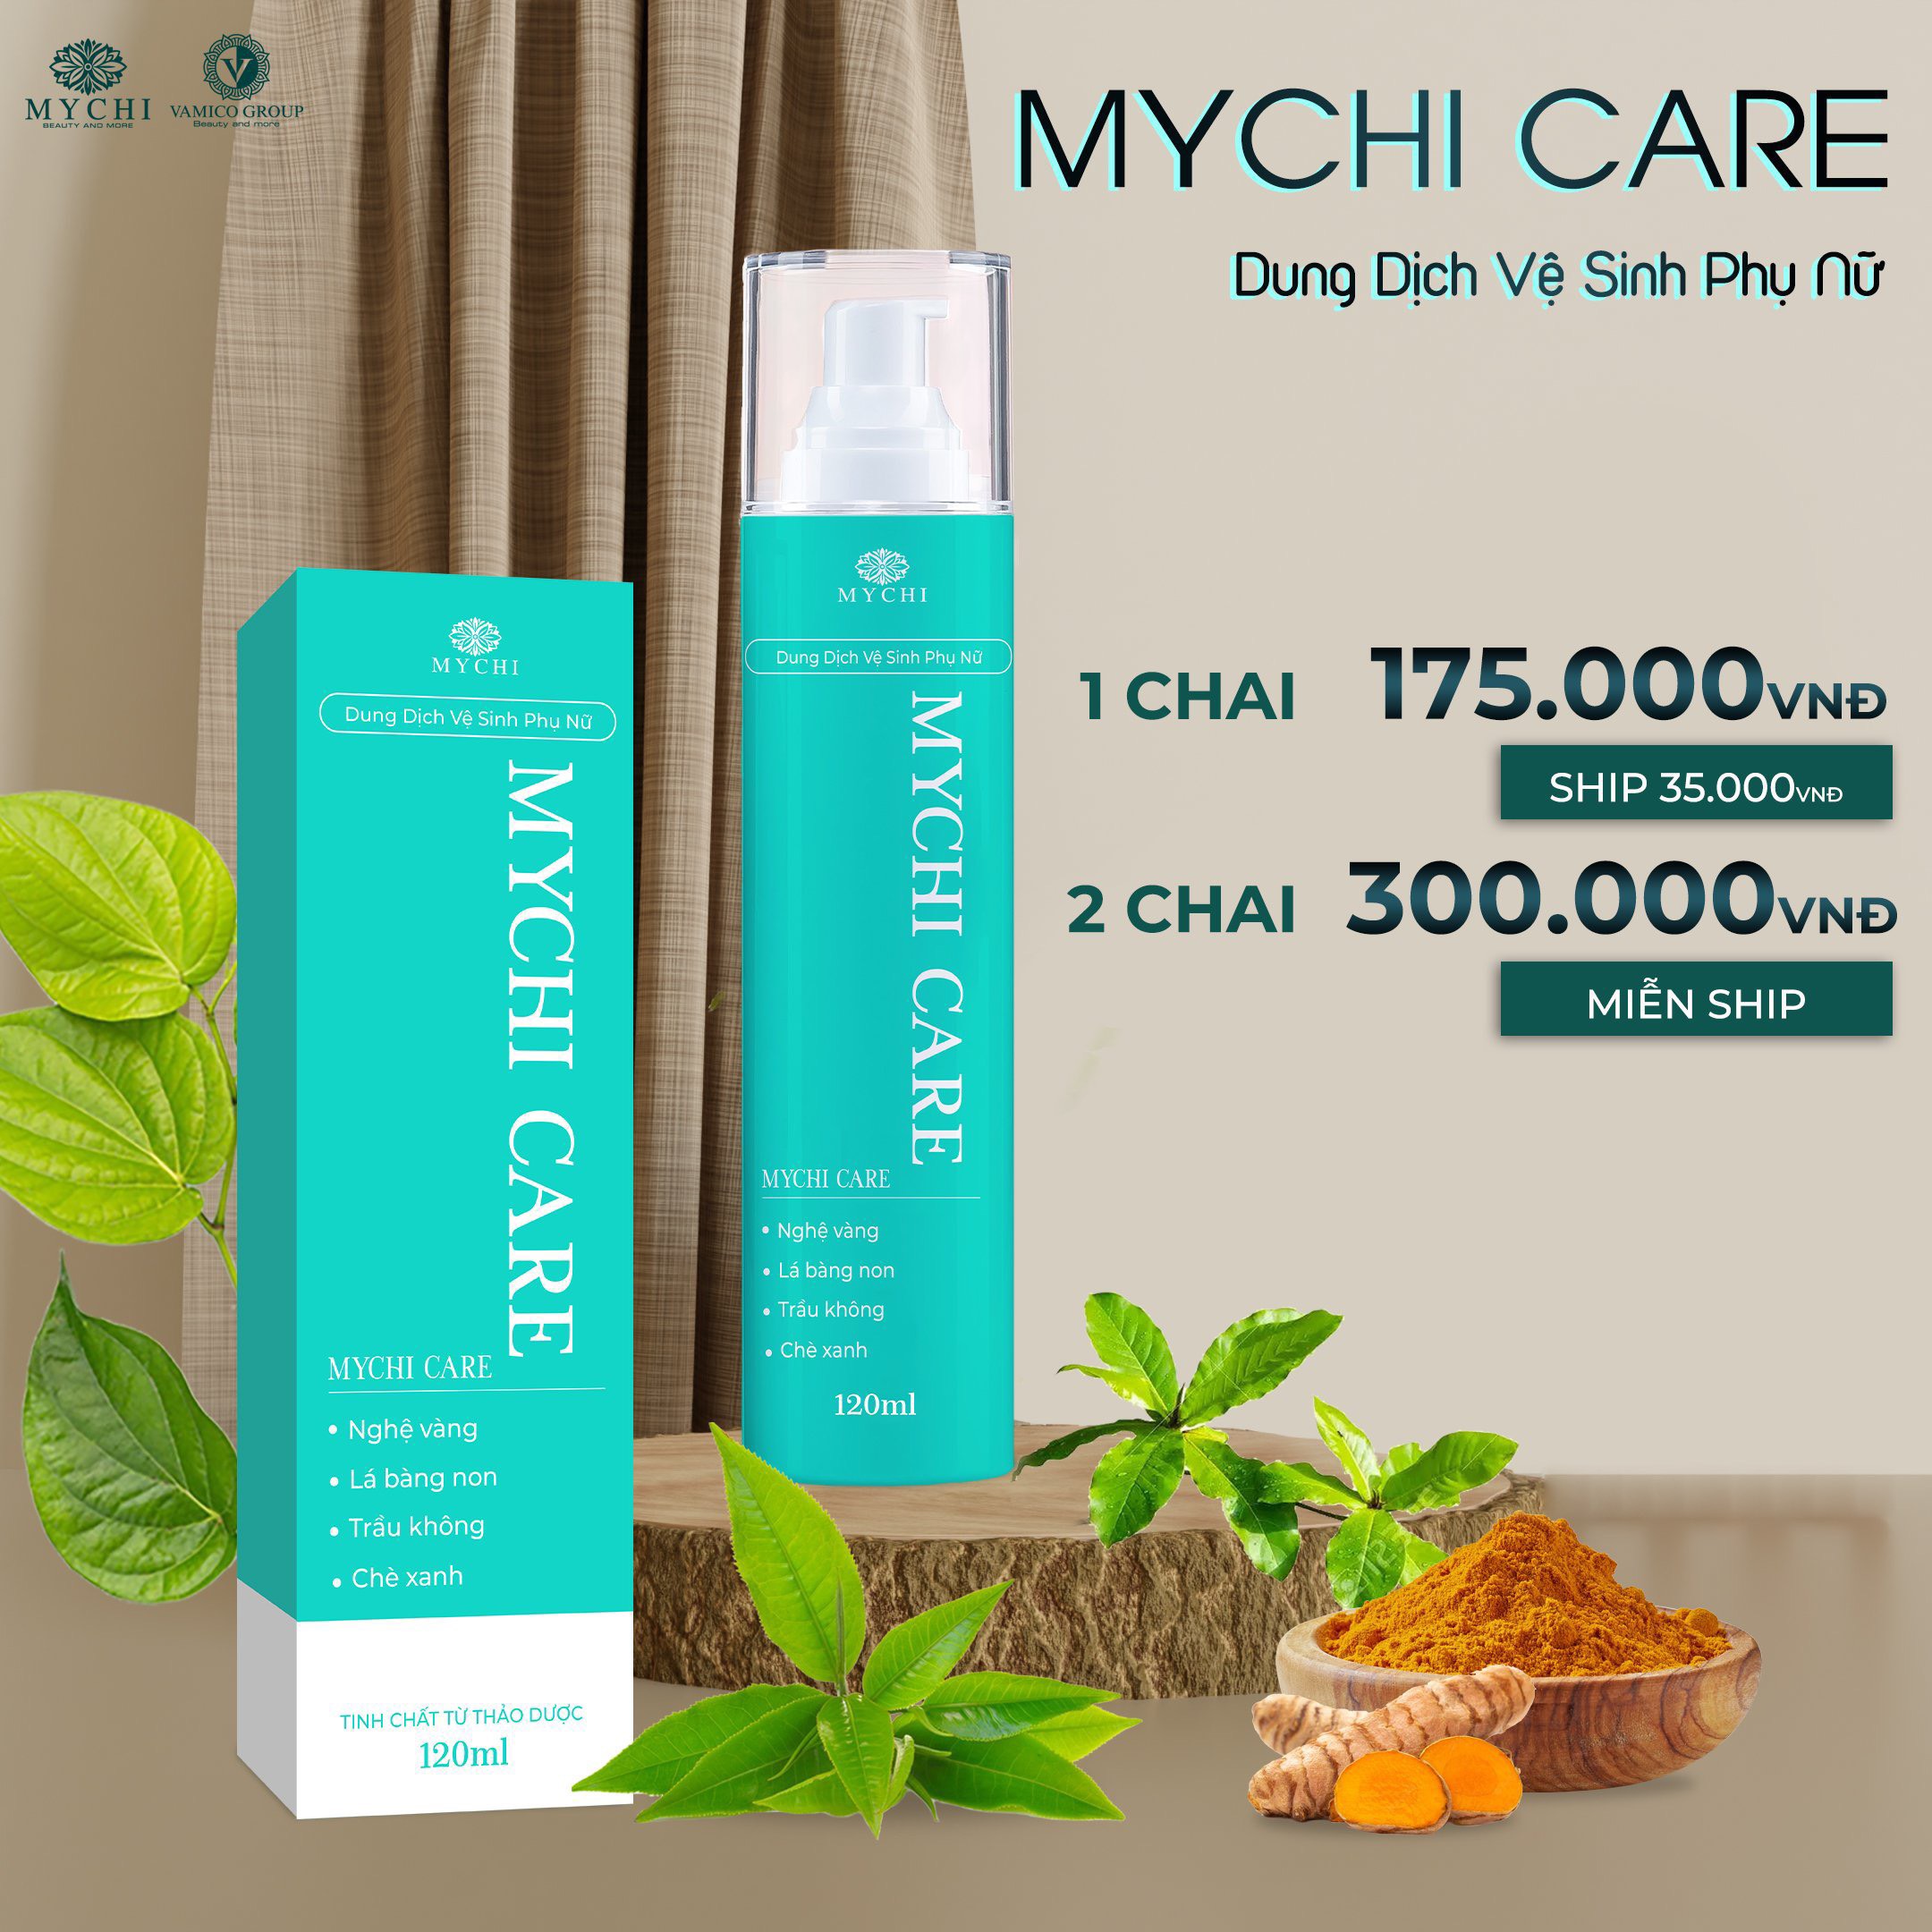 Dung dịch vệ sinh Mychi care